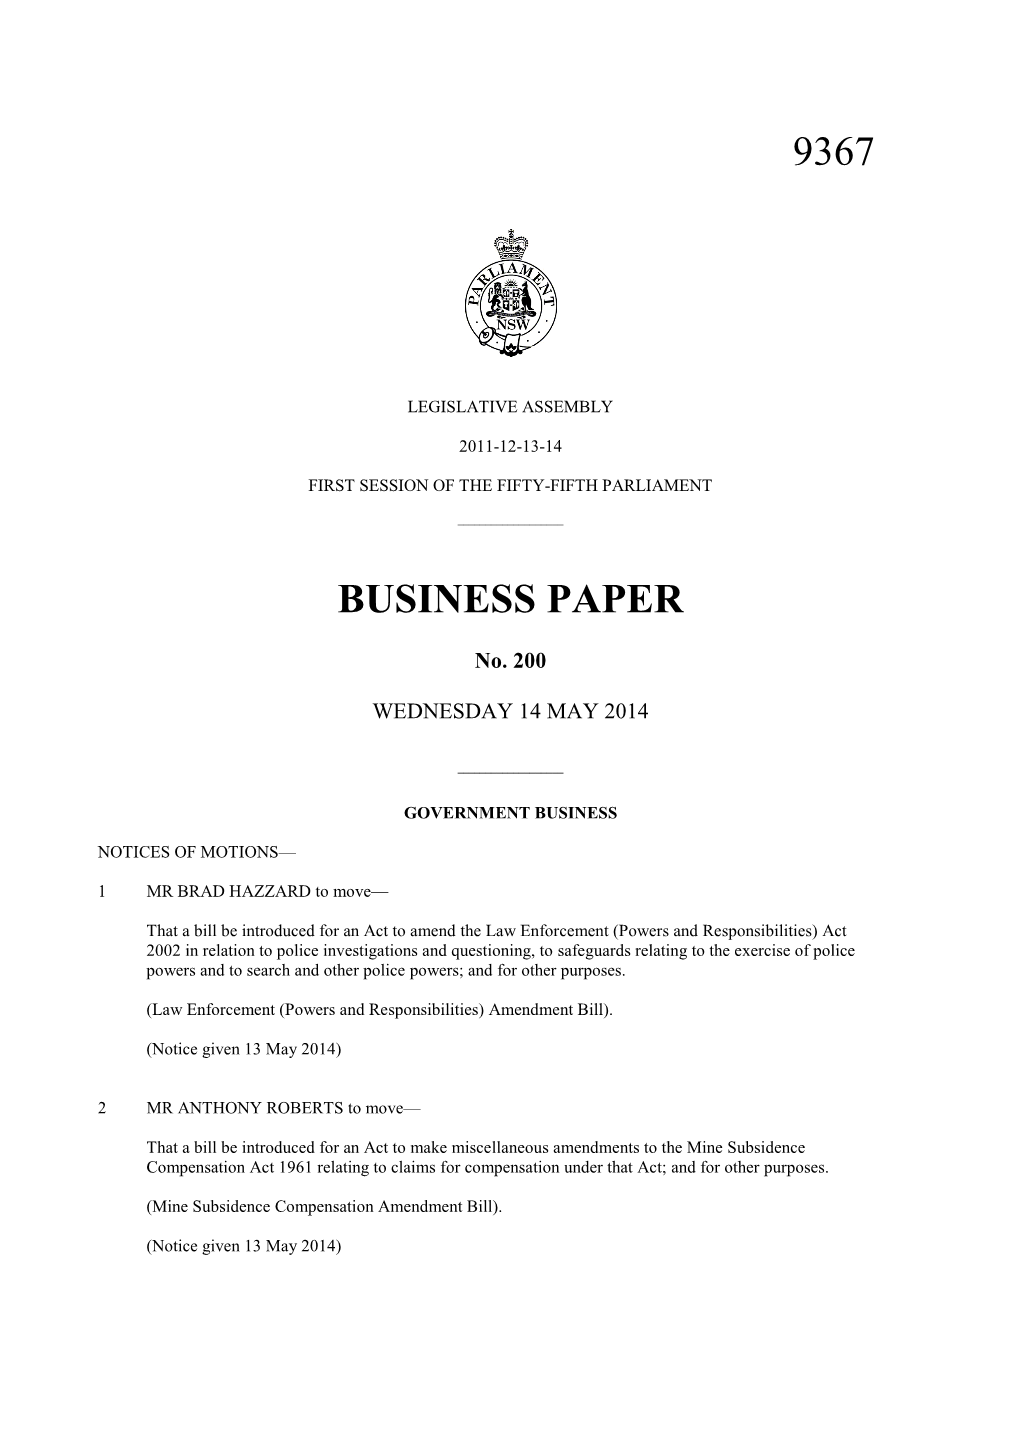 9367 Business Paper